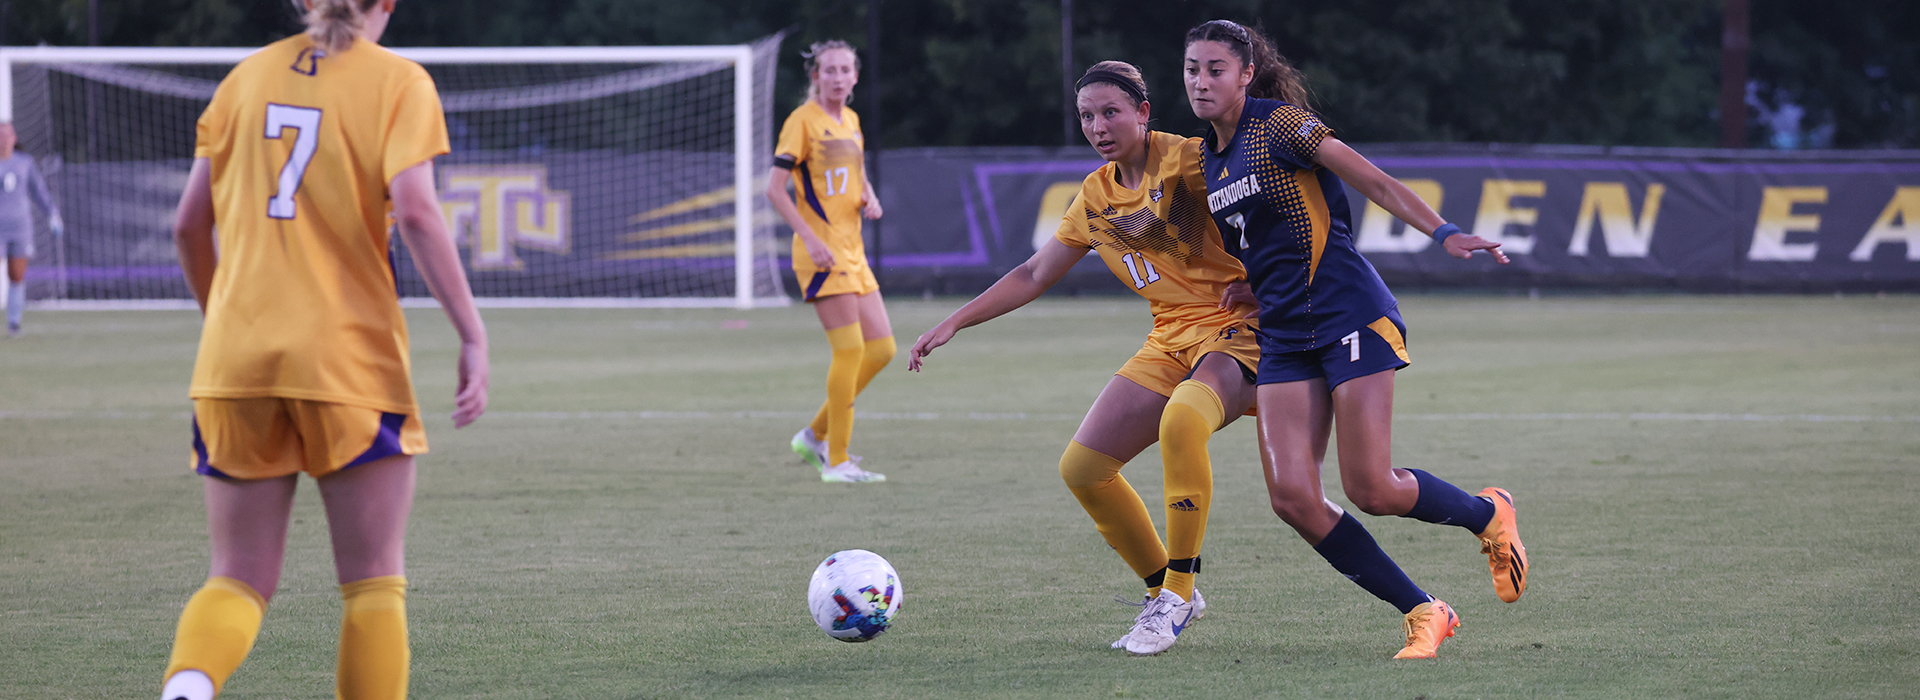 Chattanooga claims 1-0 win in Tech’s home opener